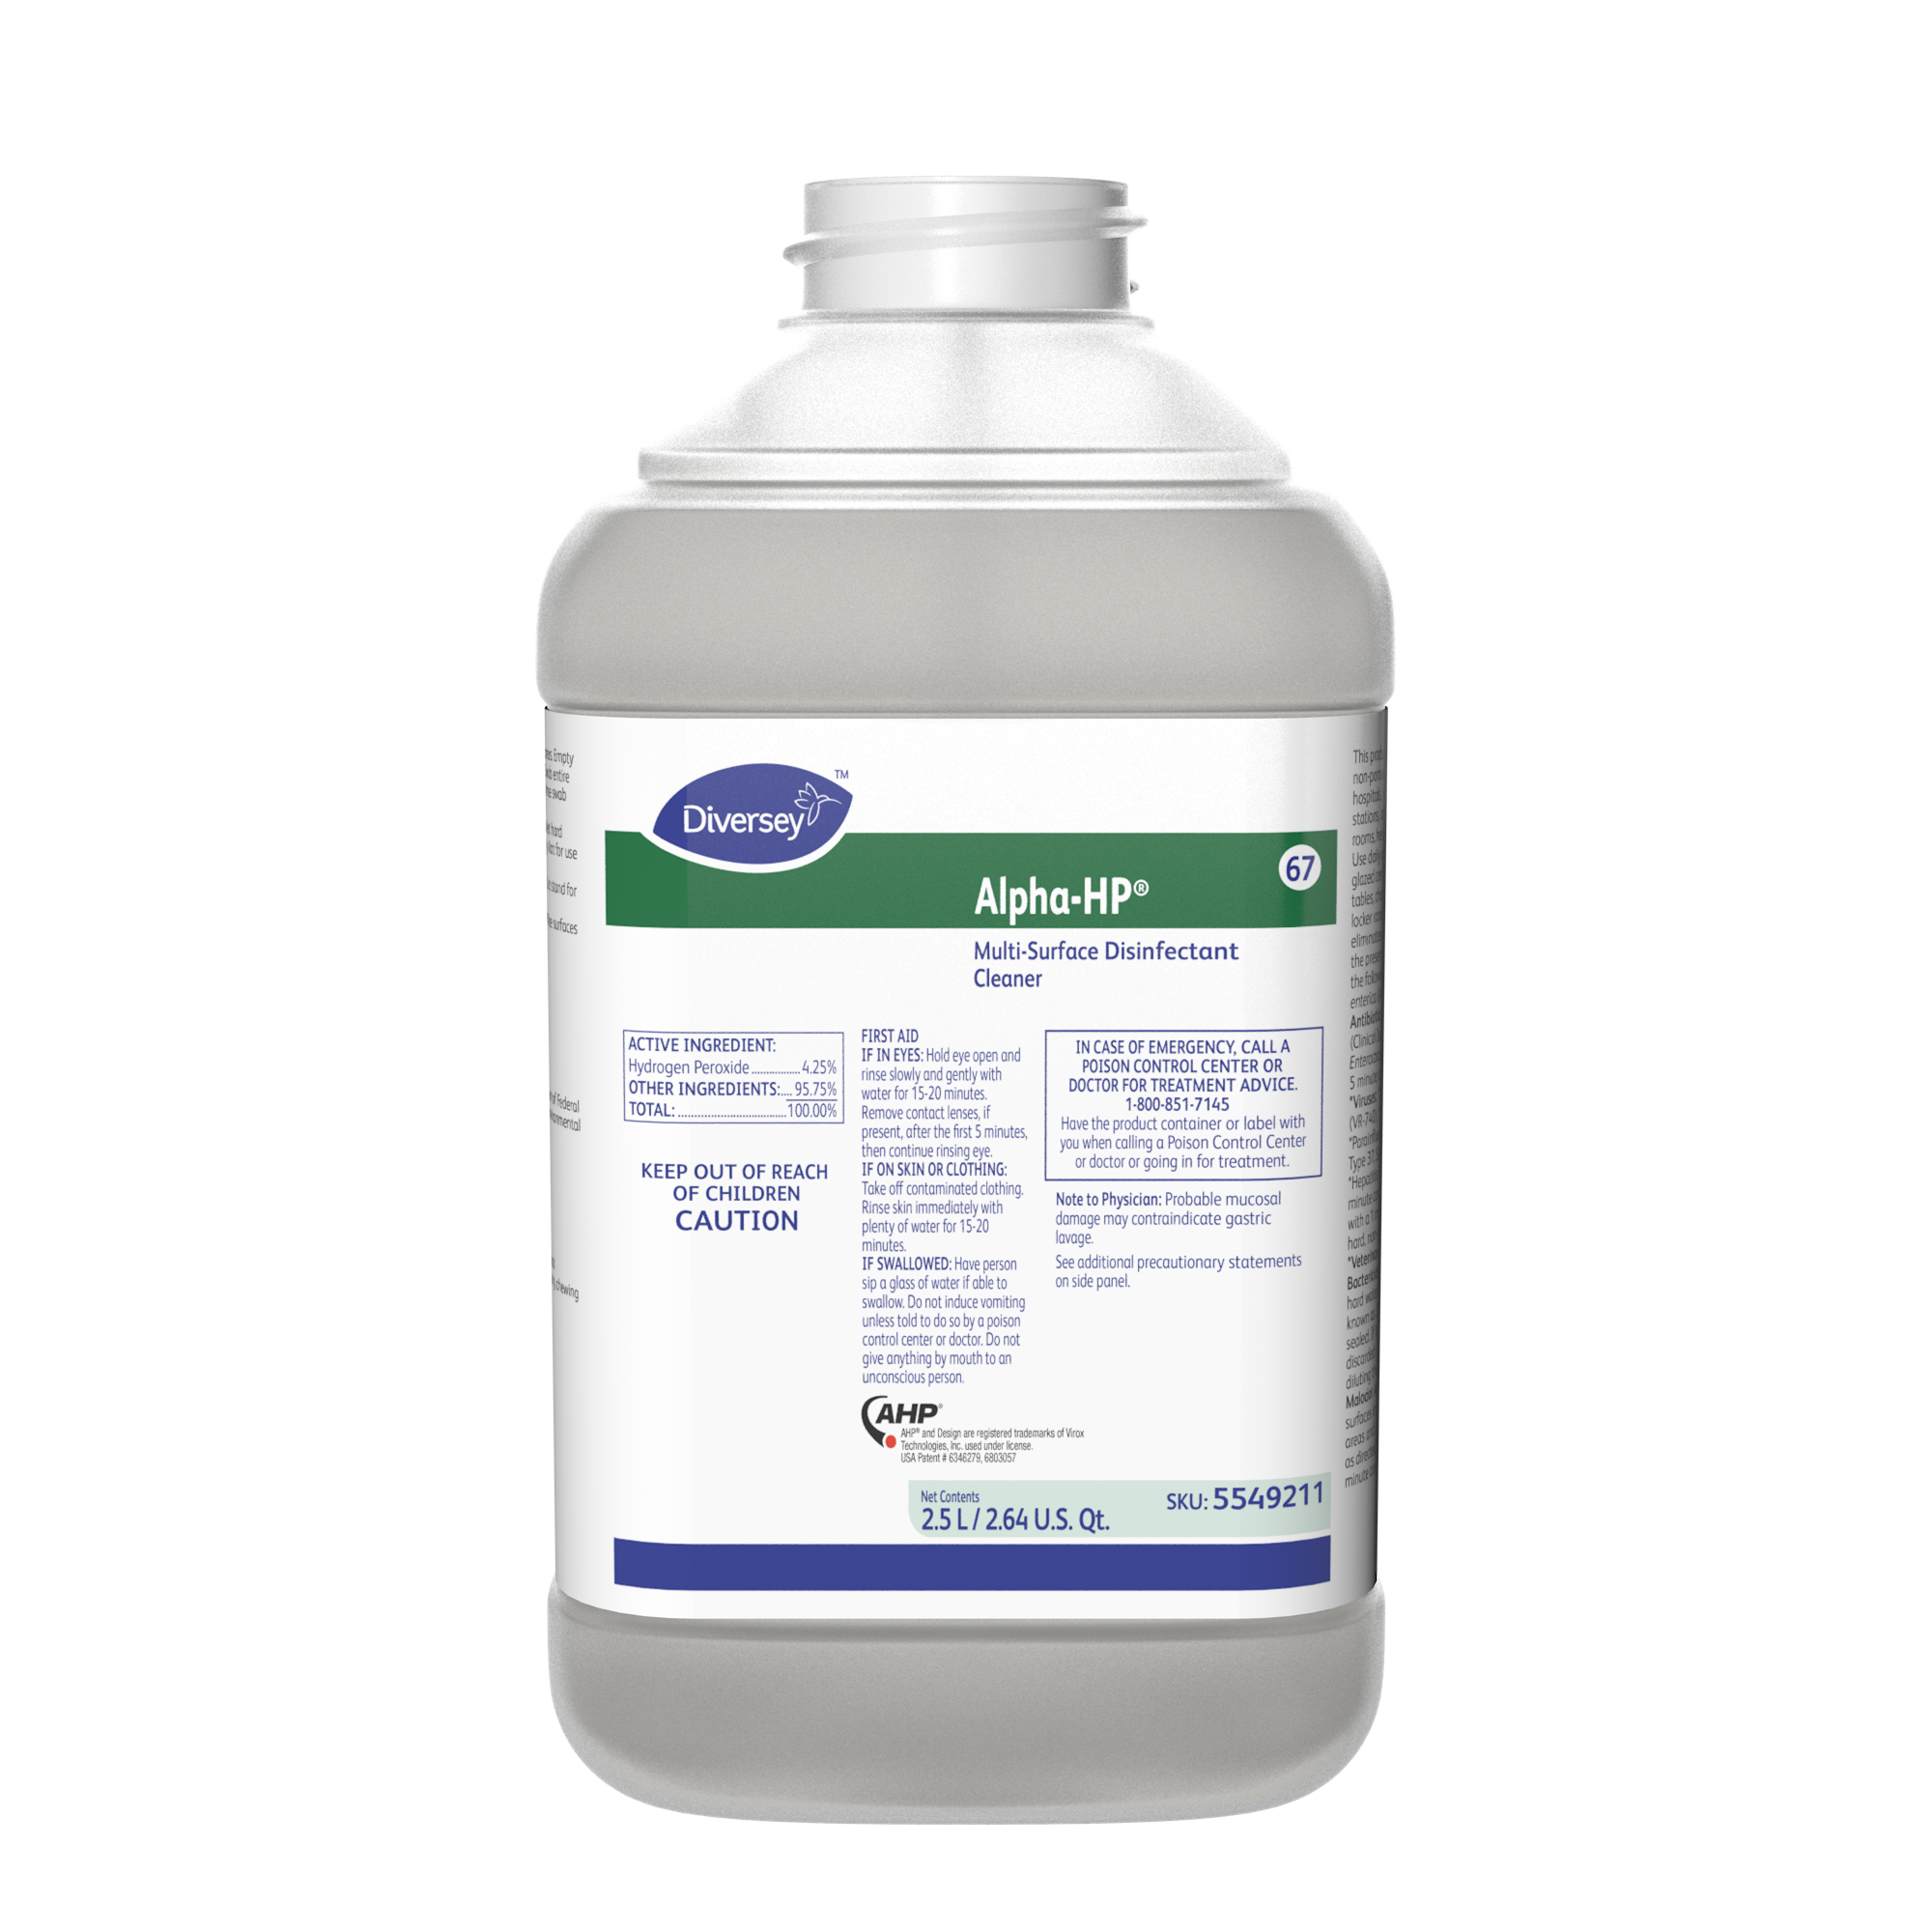 Diversey Alpha-HP Multi-Surface Disinfectant Cleaner - 2.5 L, 2/Case